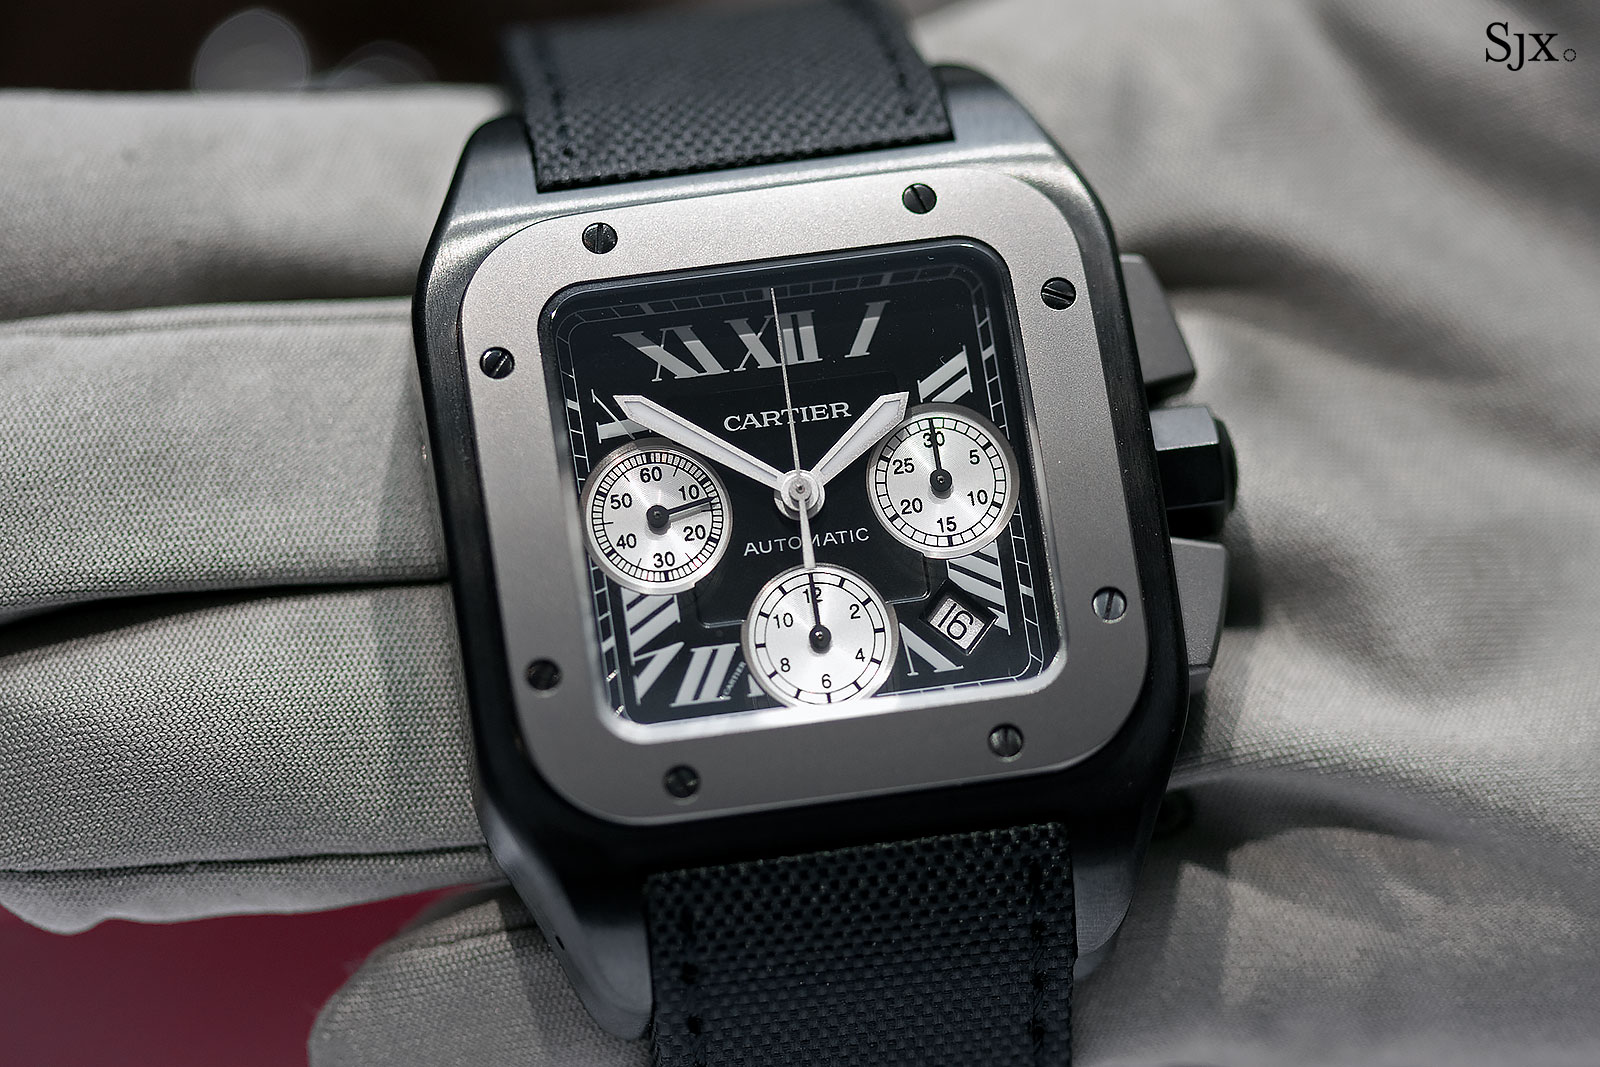 cartier chronograph watches price